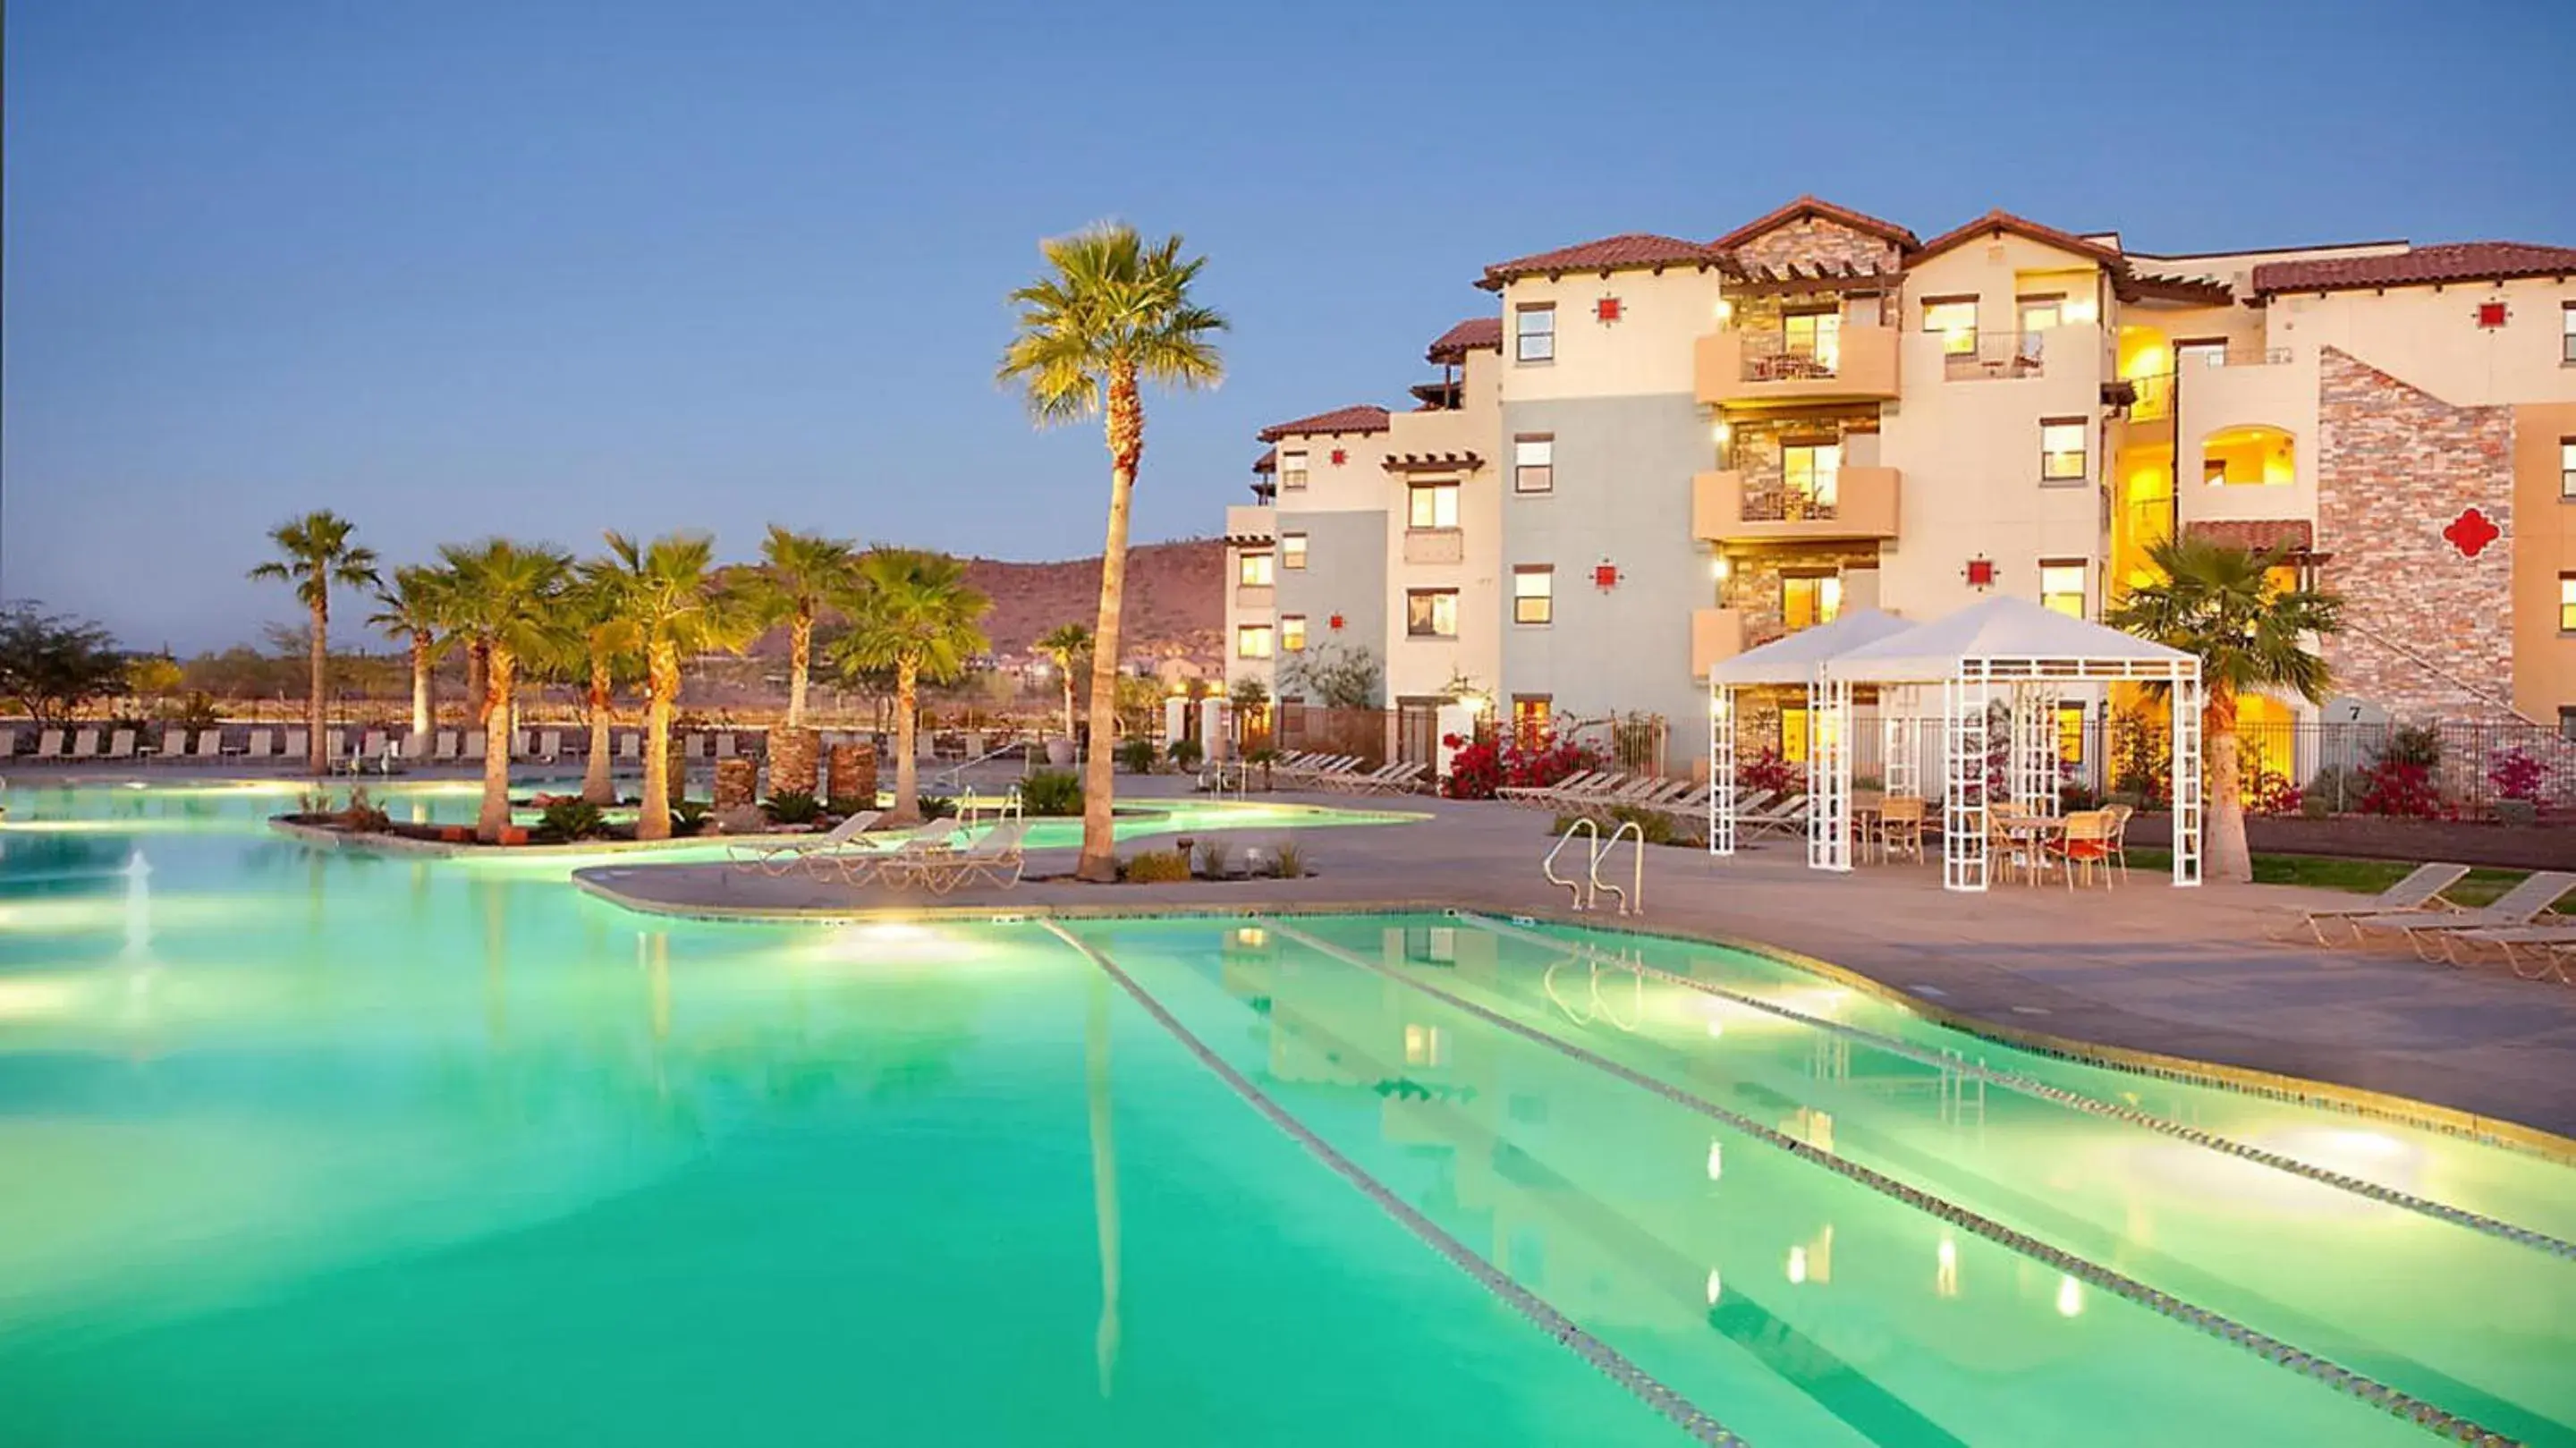 Swimming pool, Property Building in Bluegreen Vacations Cibola Vista Resort & Spa, An Ascend Resort